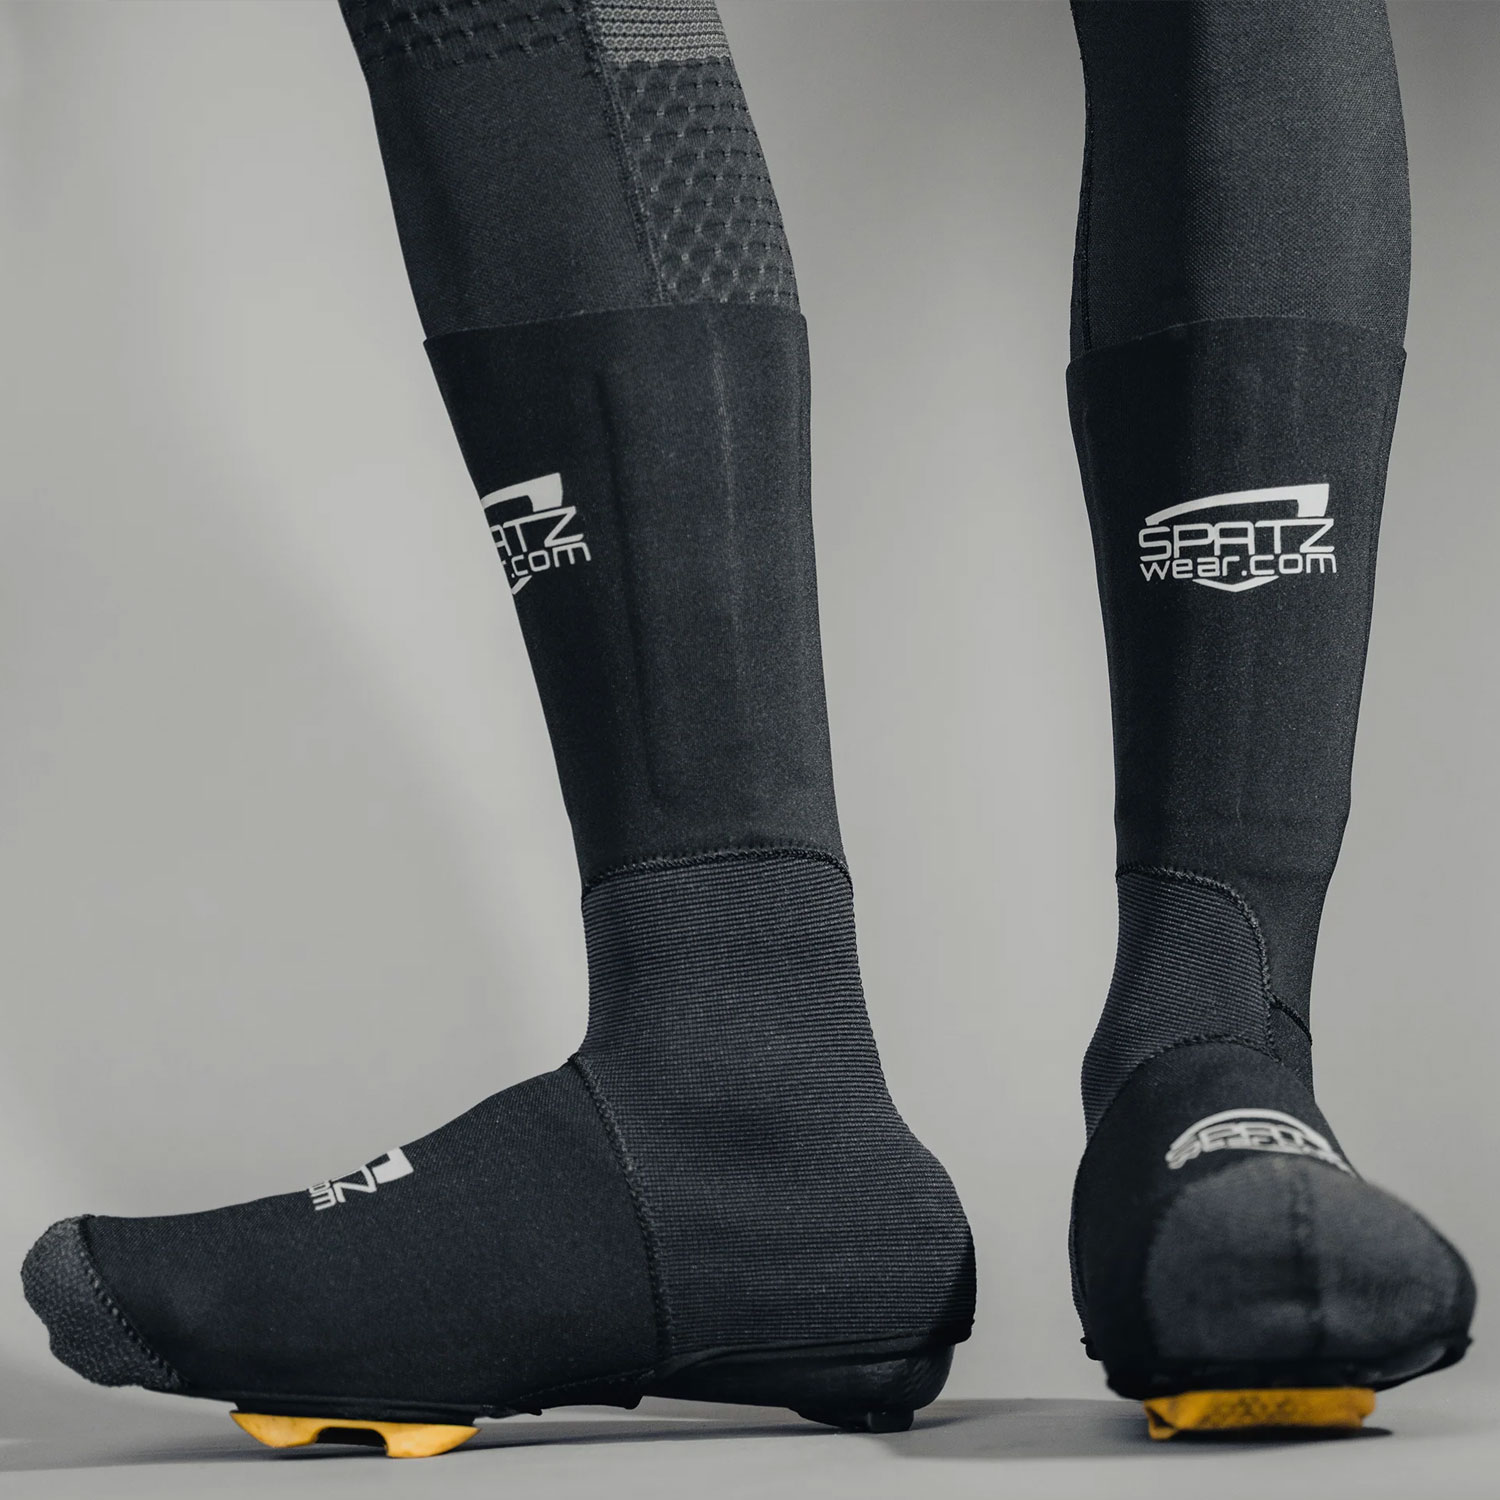 Spatz 'Fasta' UCI Legal Race Overshoes | Merlin Cycles